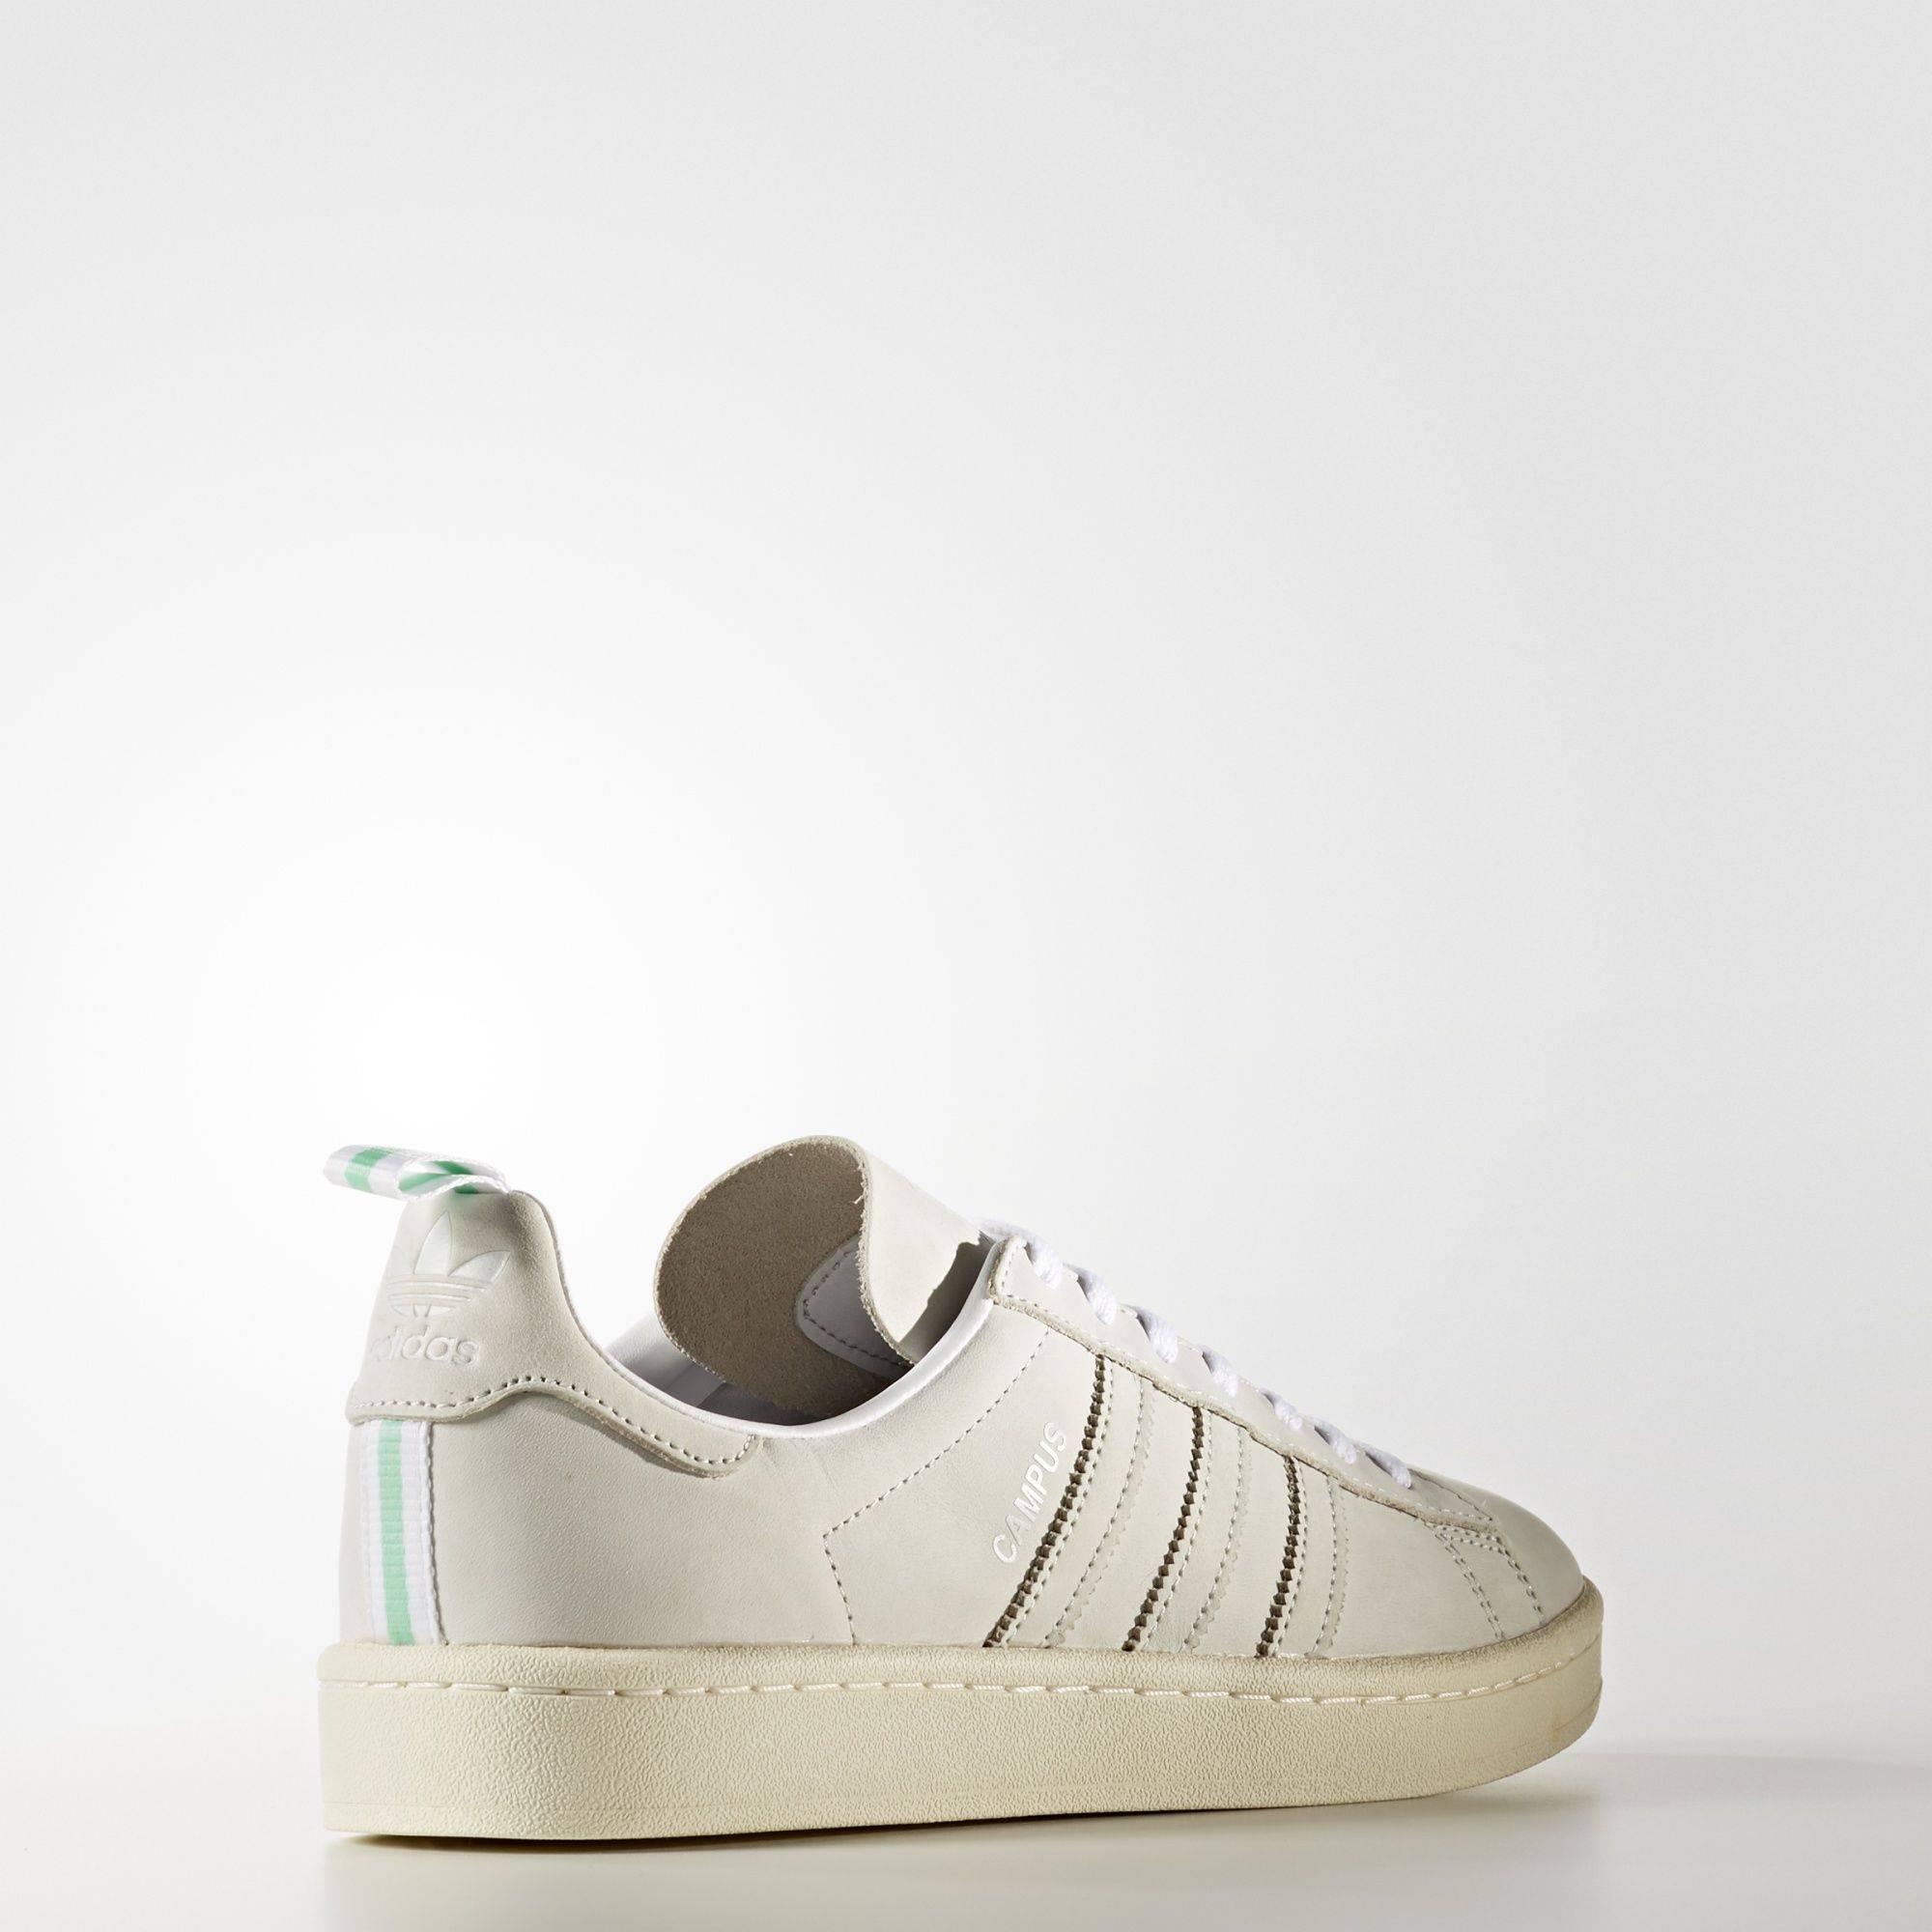 adidas Campus in White for Men - Lyst